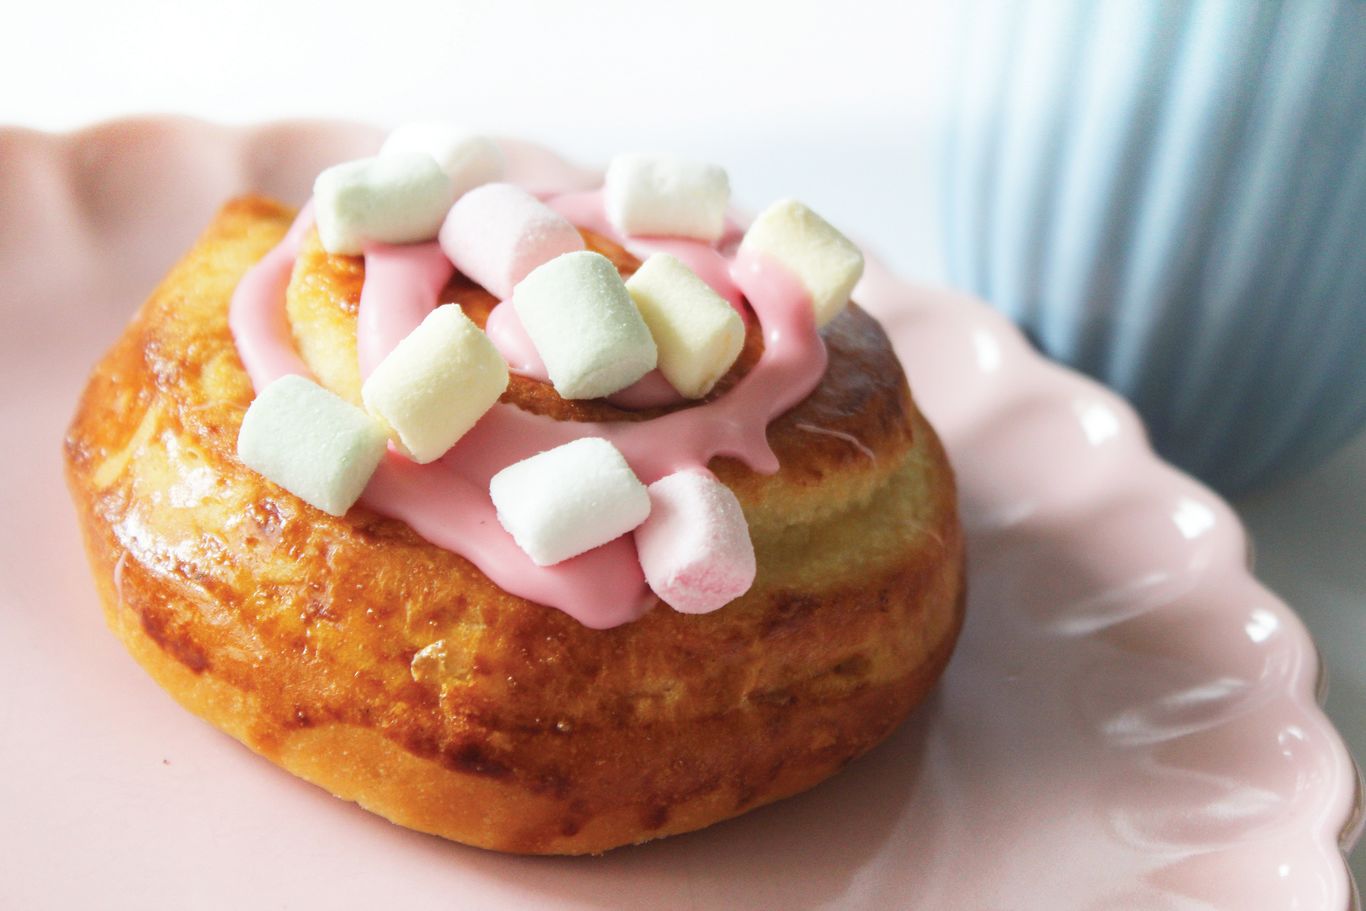 Baked roll with marshmallows and vanilla